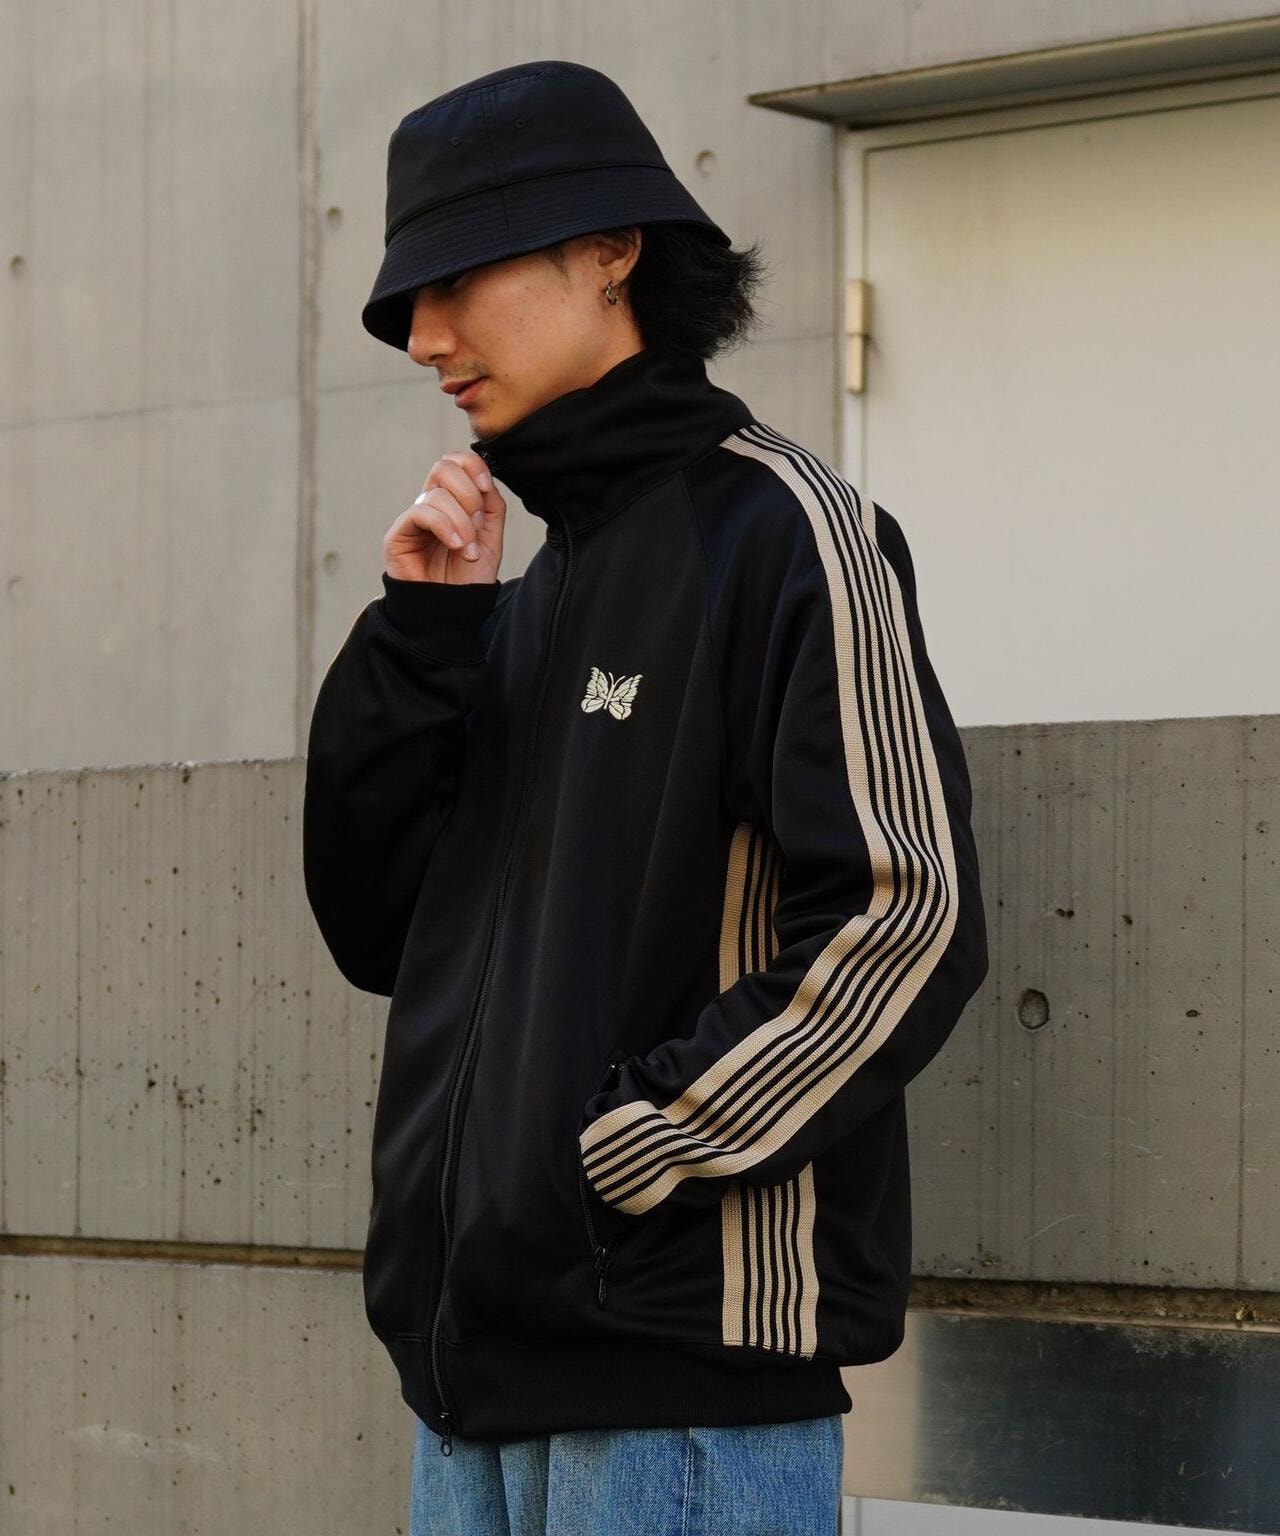 NEEDLES/ニードルズ/LHP Exclusive Track Jacket - Poly Smooth/別注 ...